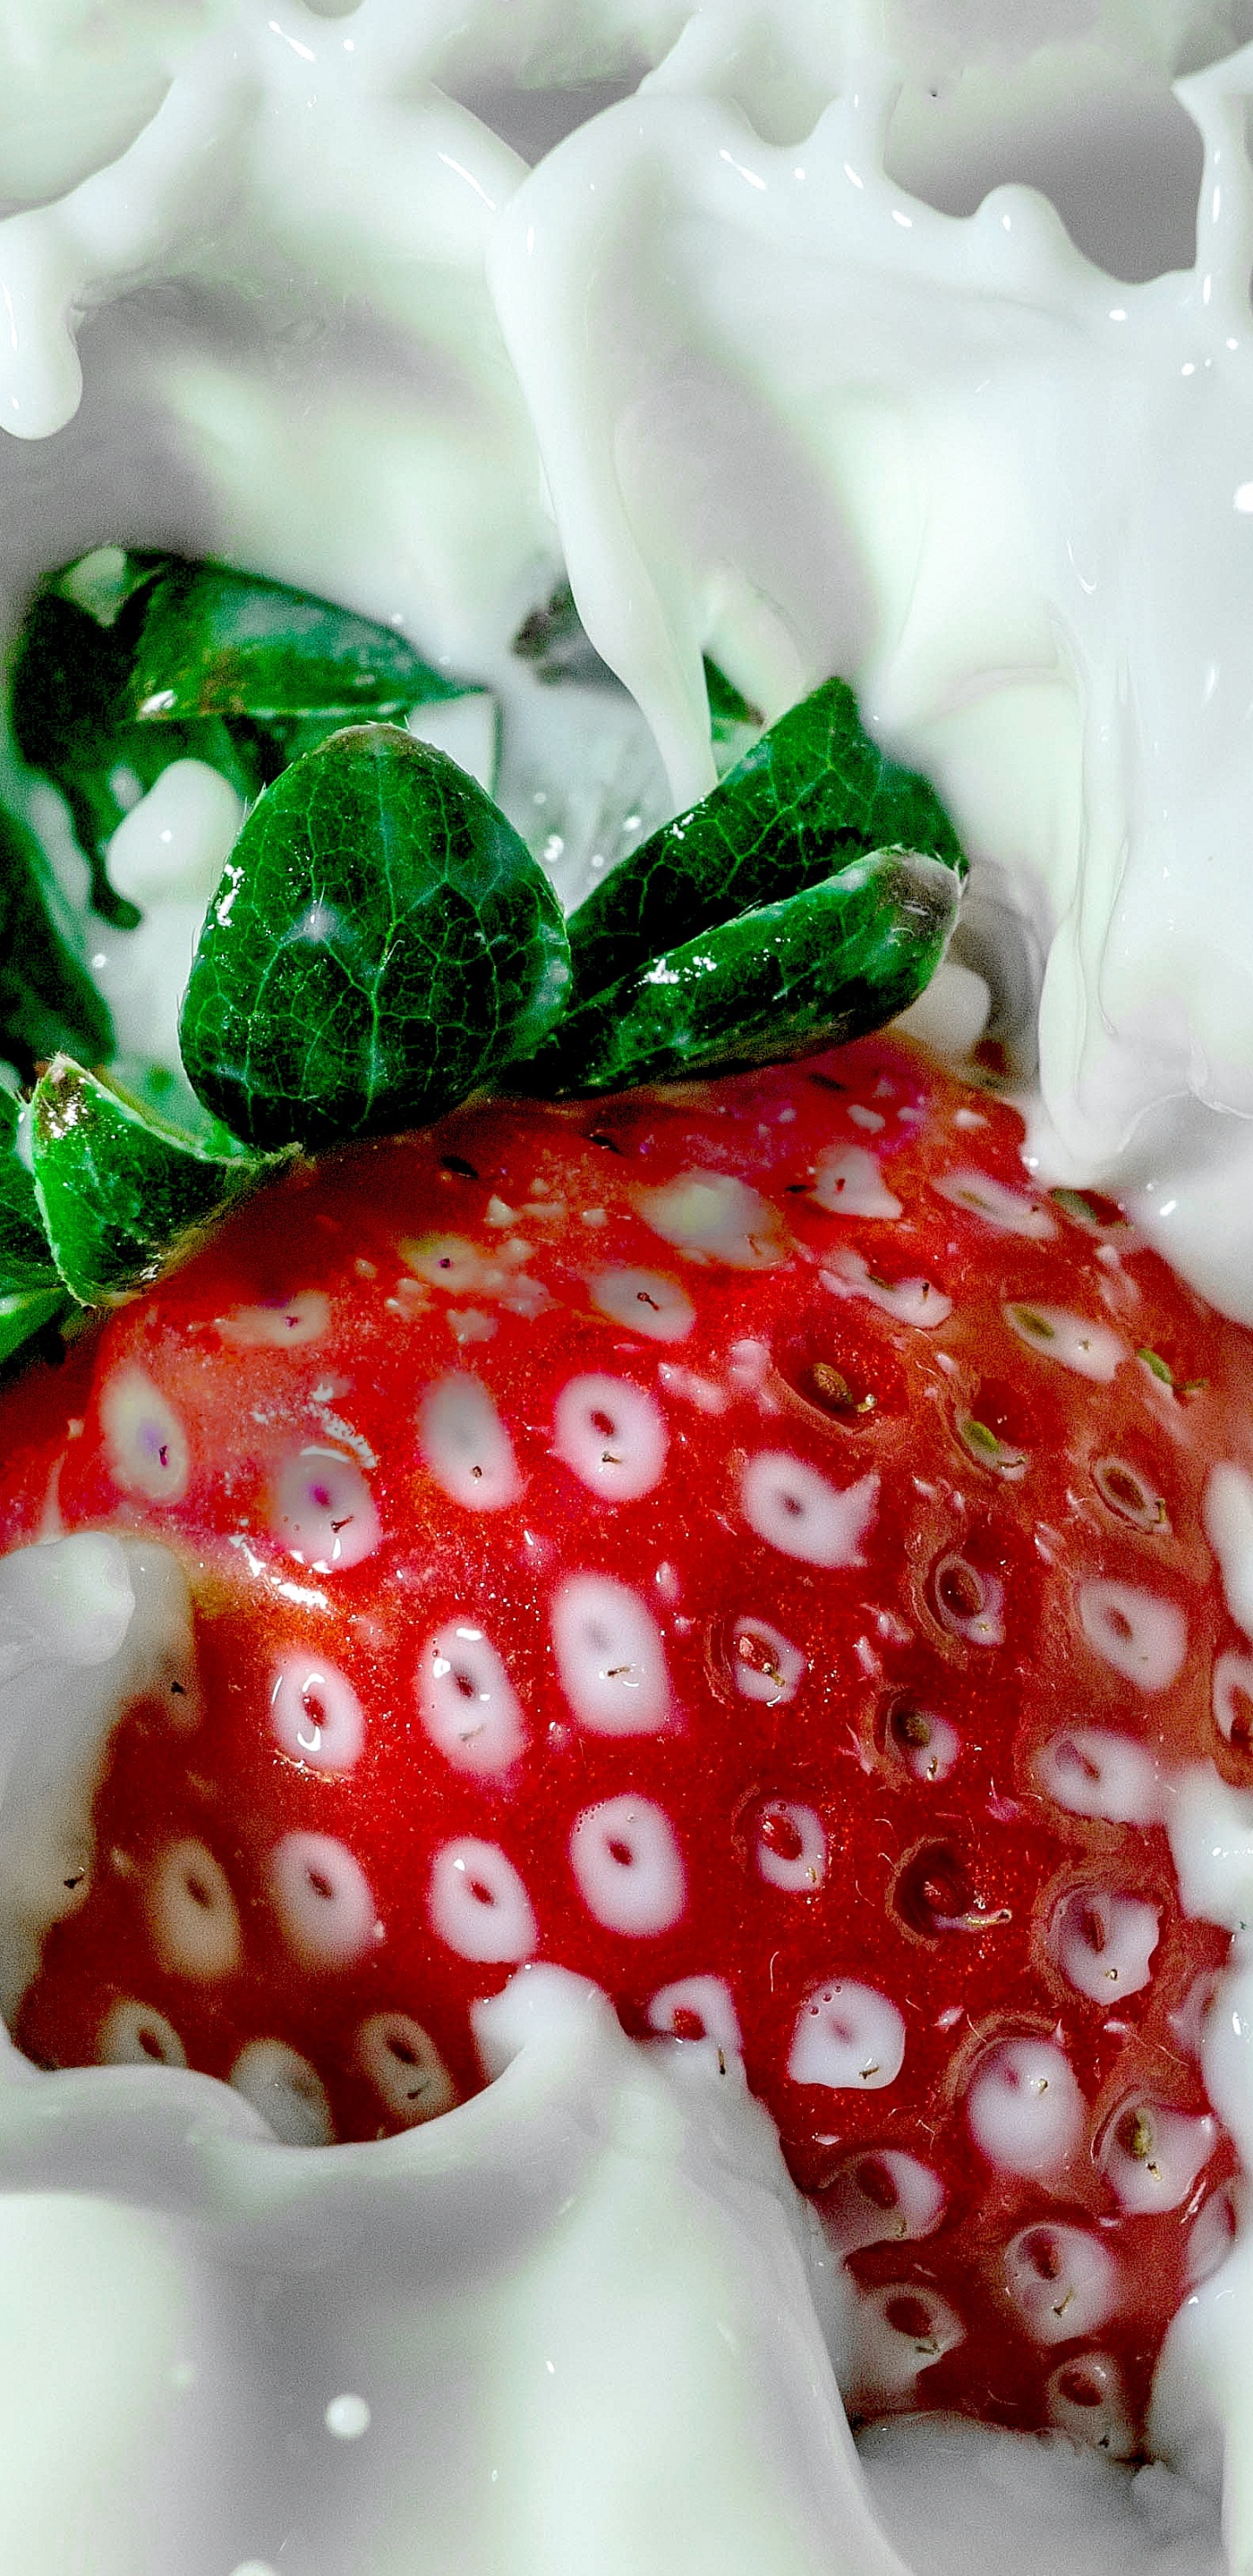 Strawberry on White Ceramic Plate. Wallpaper in 1440x2960 Resolution